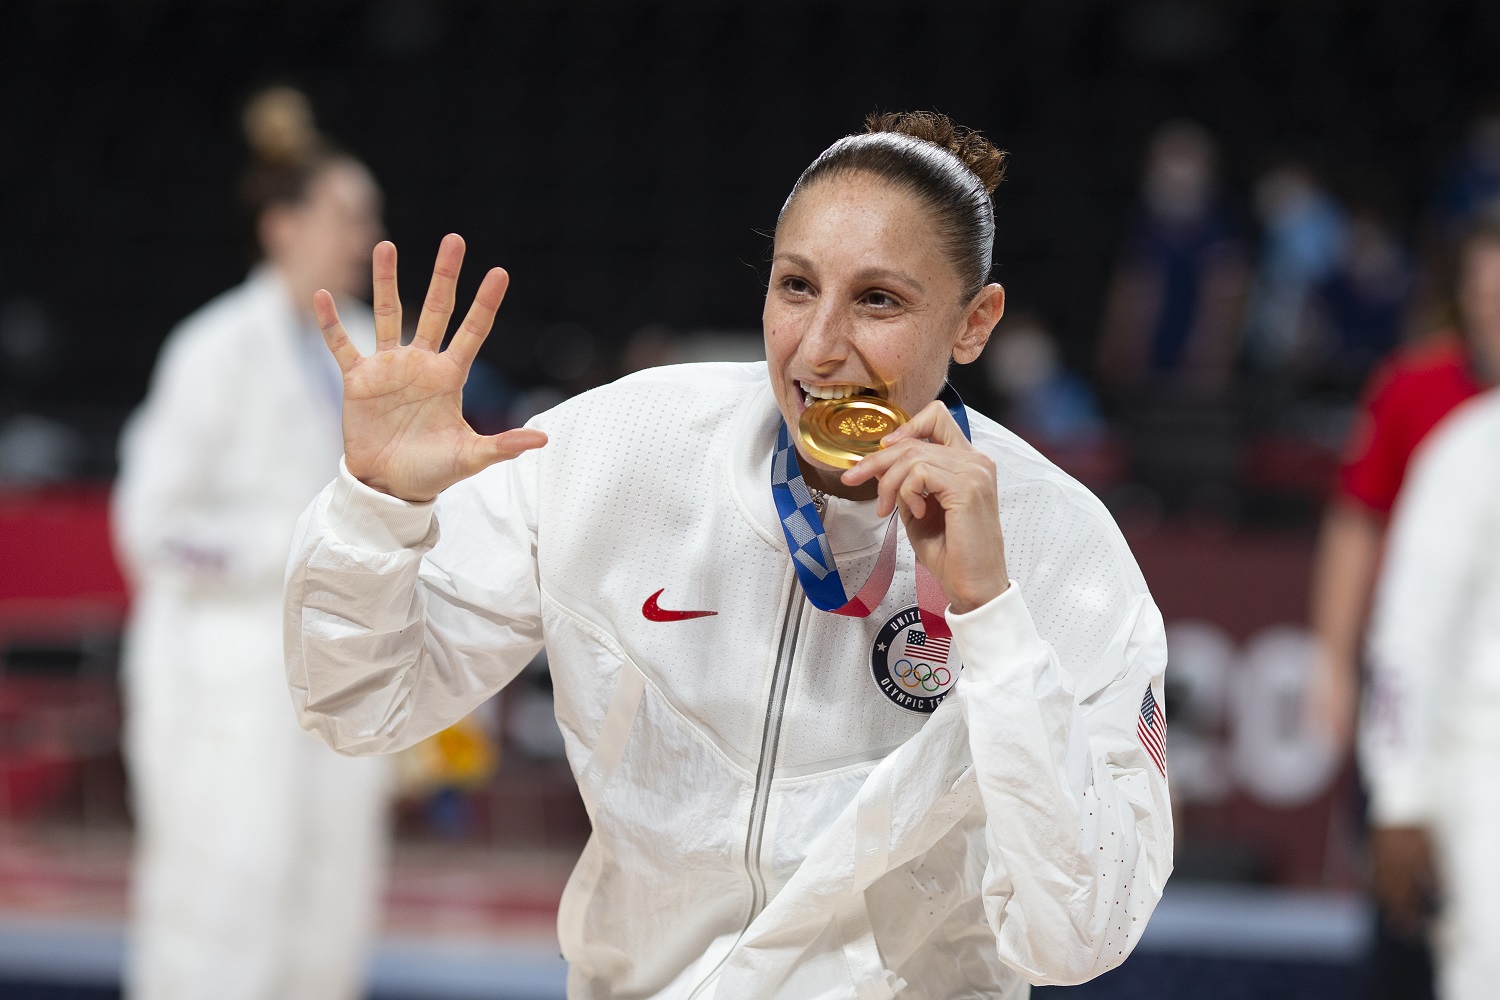 Five-time Olympic gold medalist Diana Taurasi with her gold medal at the presentation after the victory over Japan in the championship game on Aug. 8, 2021.